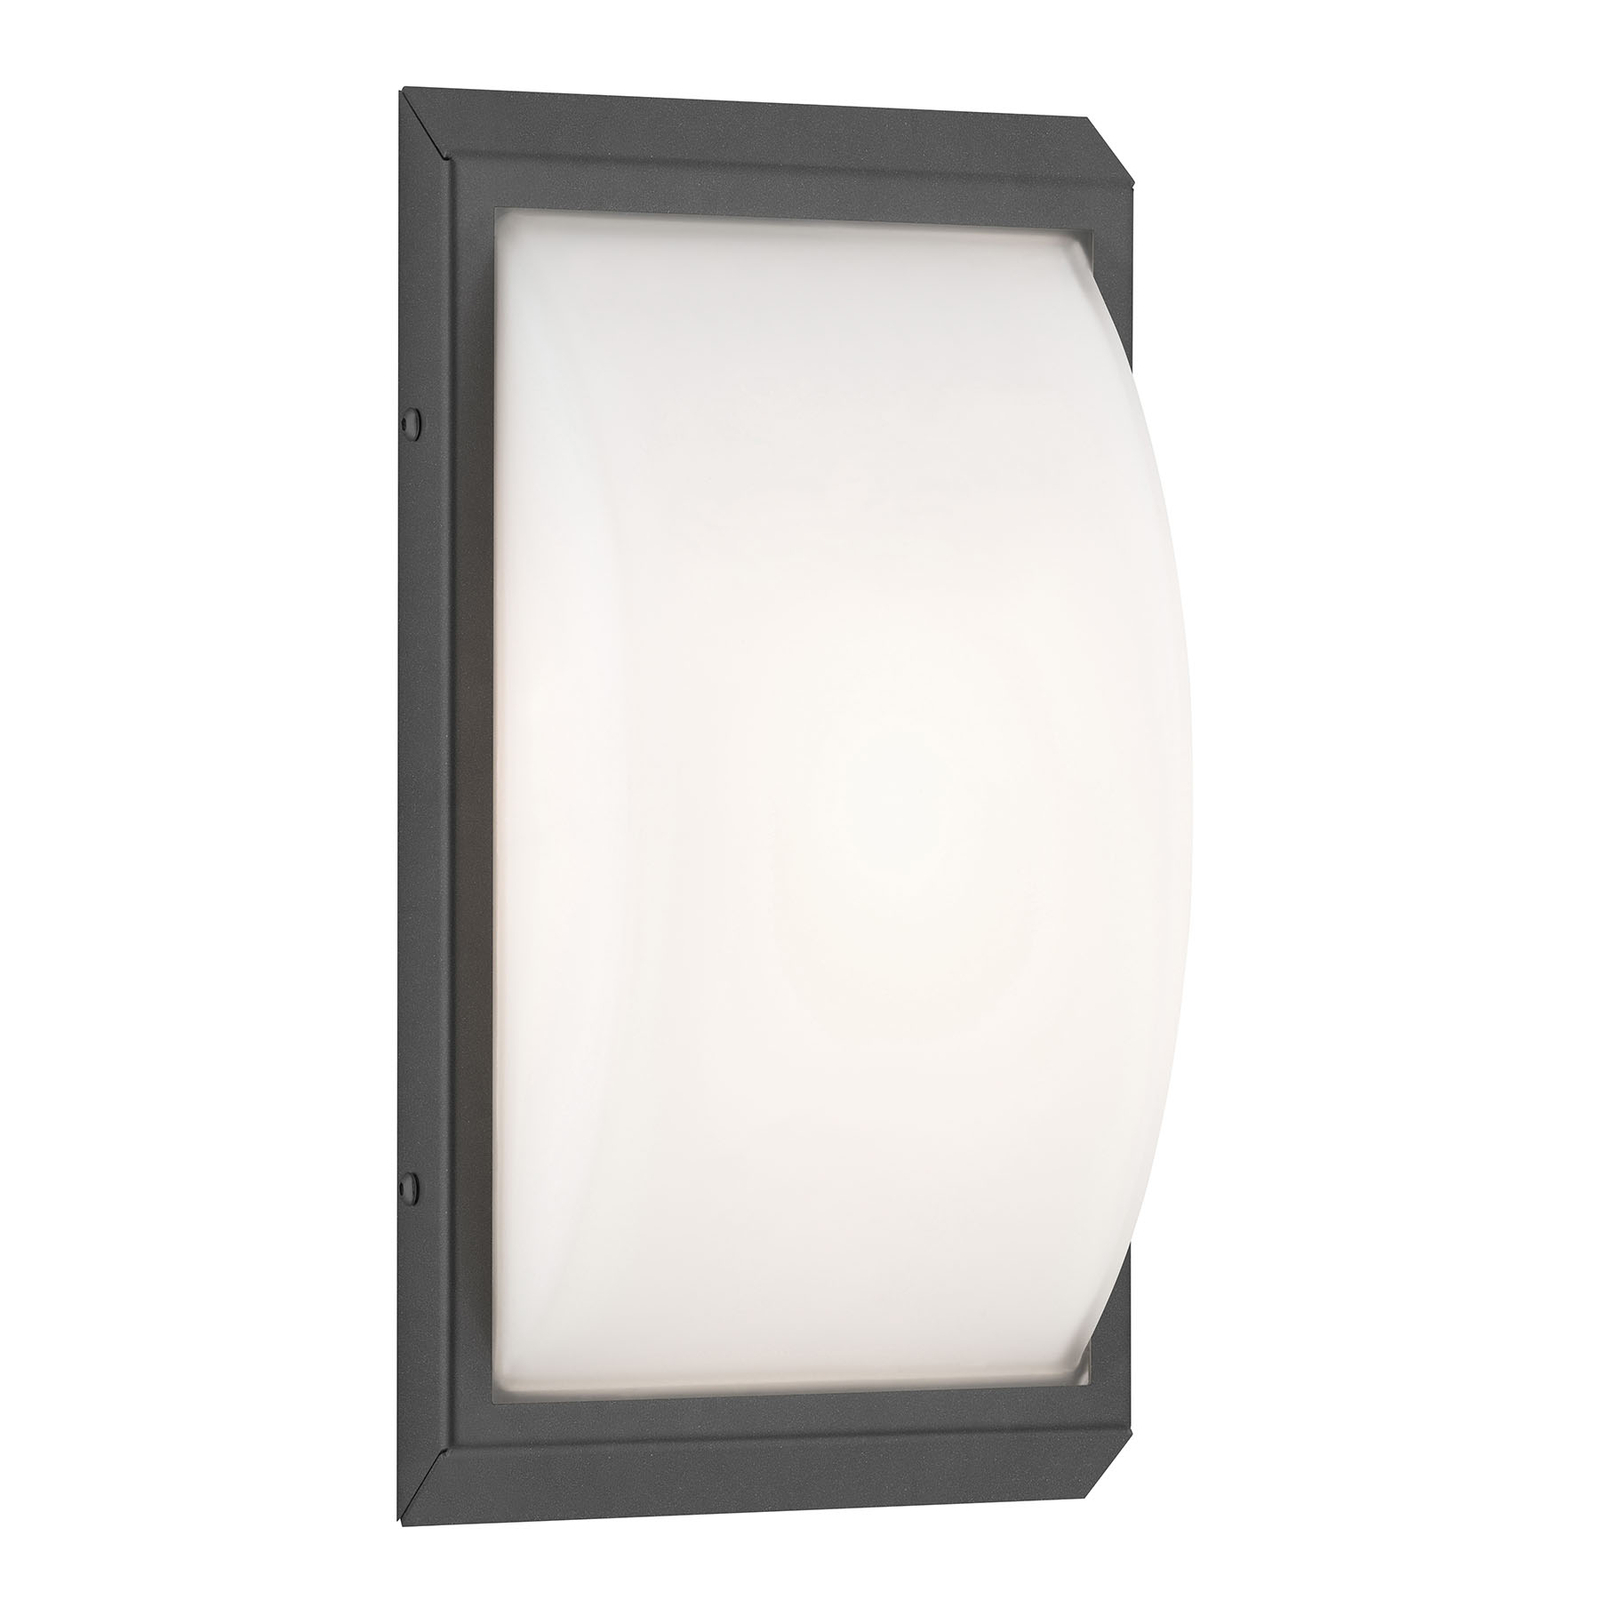 053 LED outdoor wall lamp stainless steel graphite